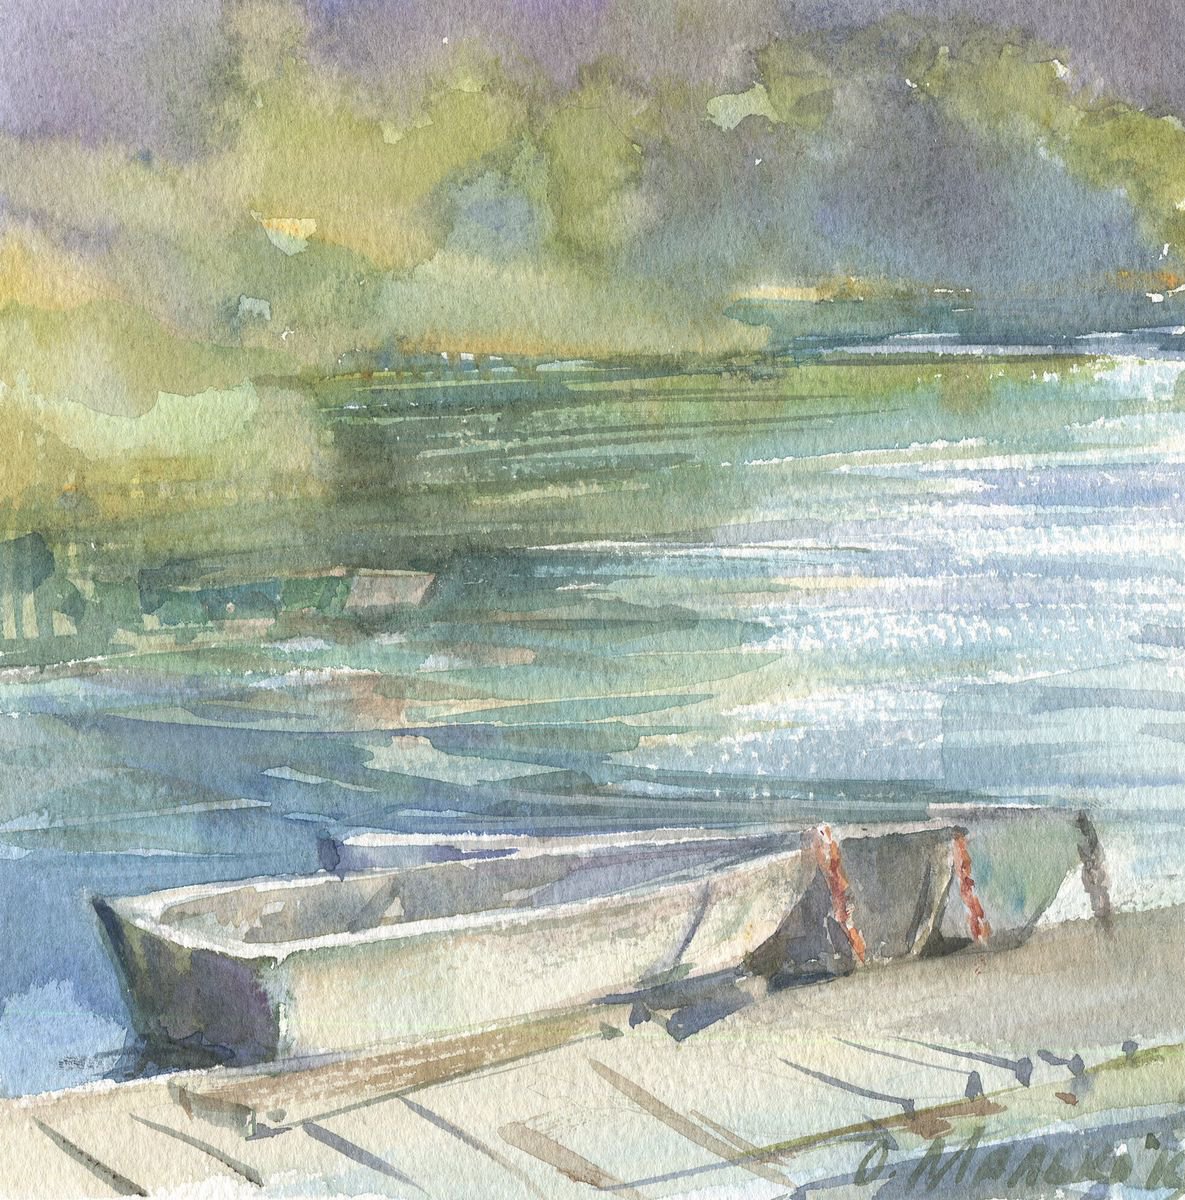 Old rowboats / River sketch Summer watercolor landscape by Olha Malko